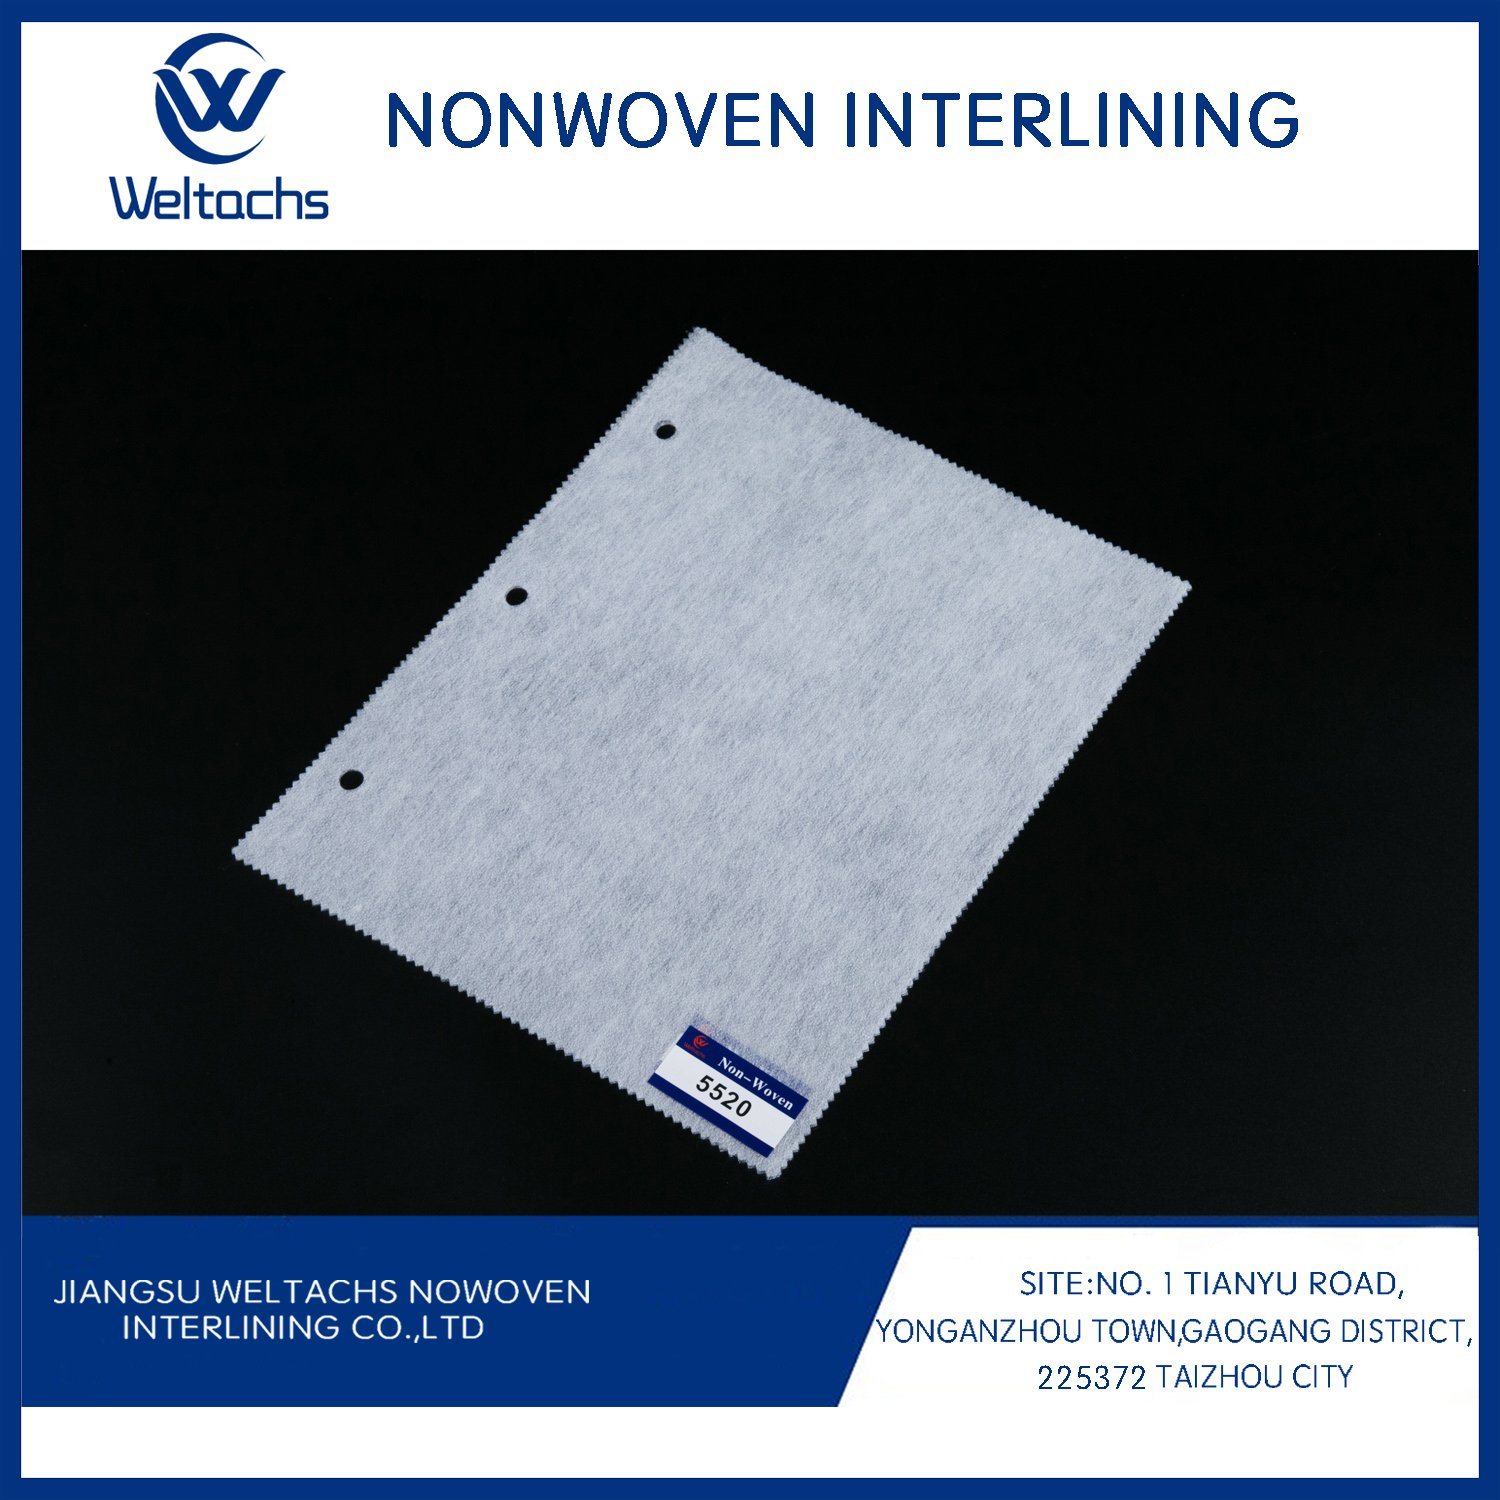 100% Polyester Cut Away Fusible Nonwoven Fabric 1025hf Chemical Bond Gum Stay Non Woven Interlining